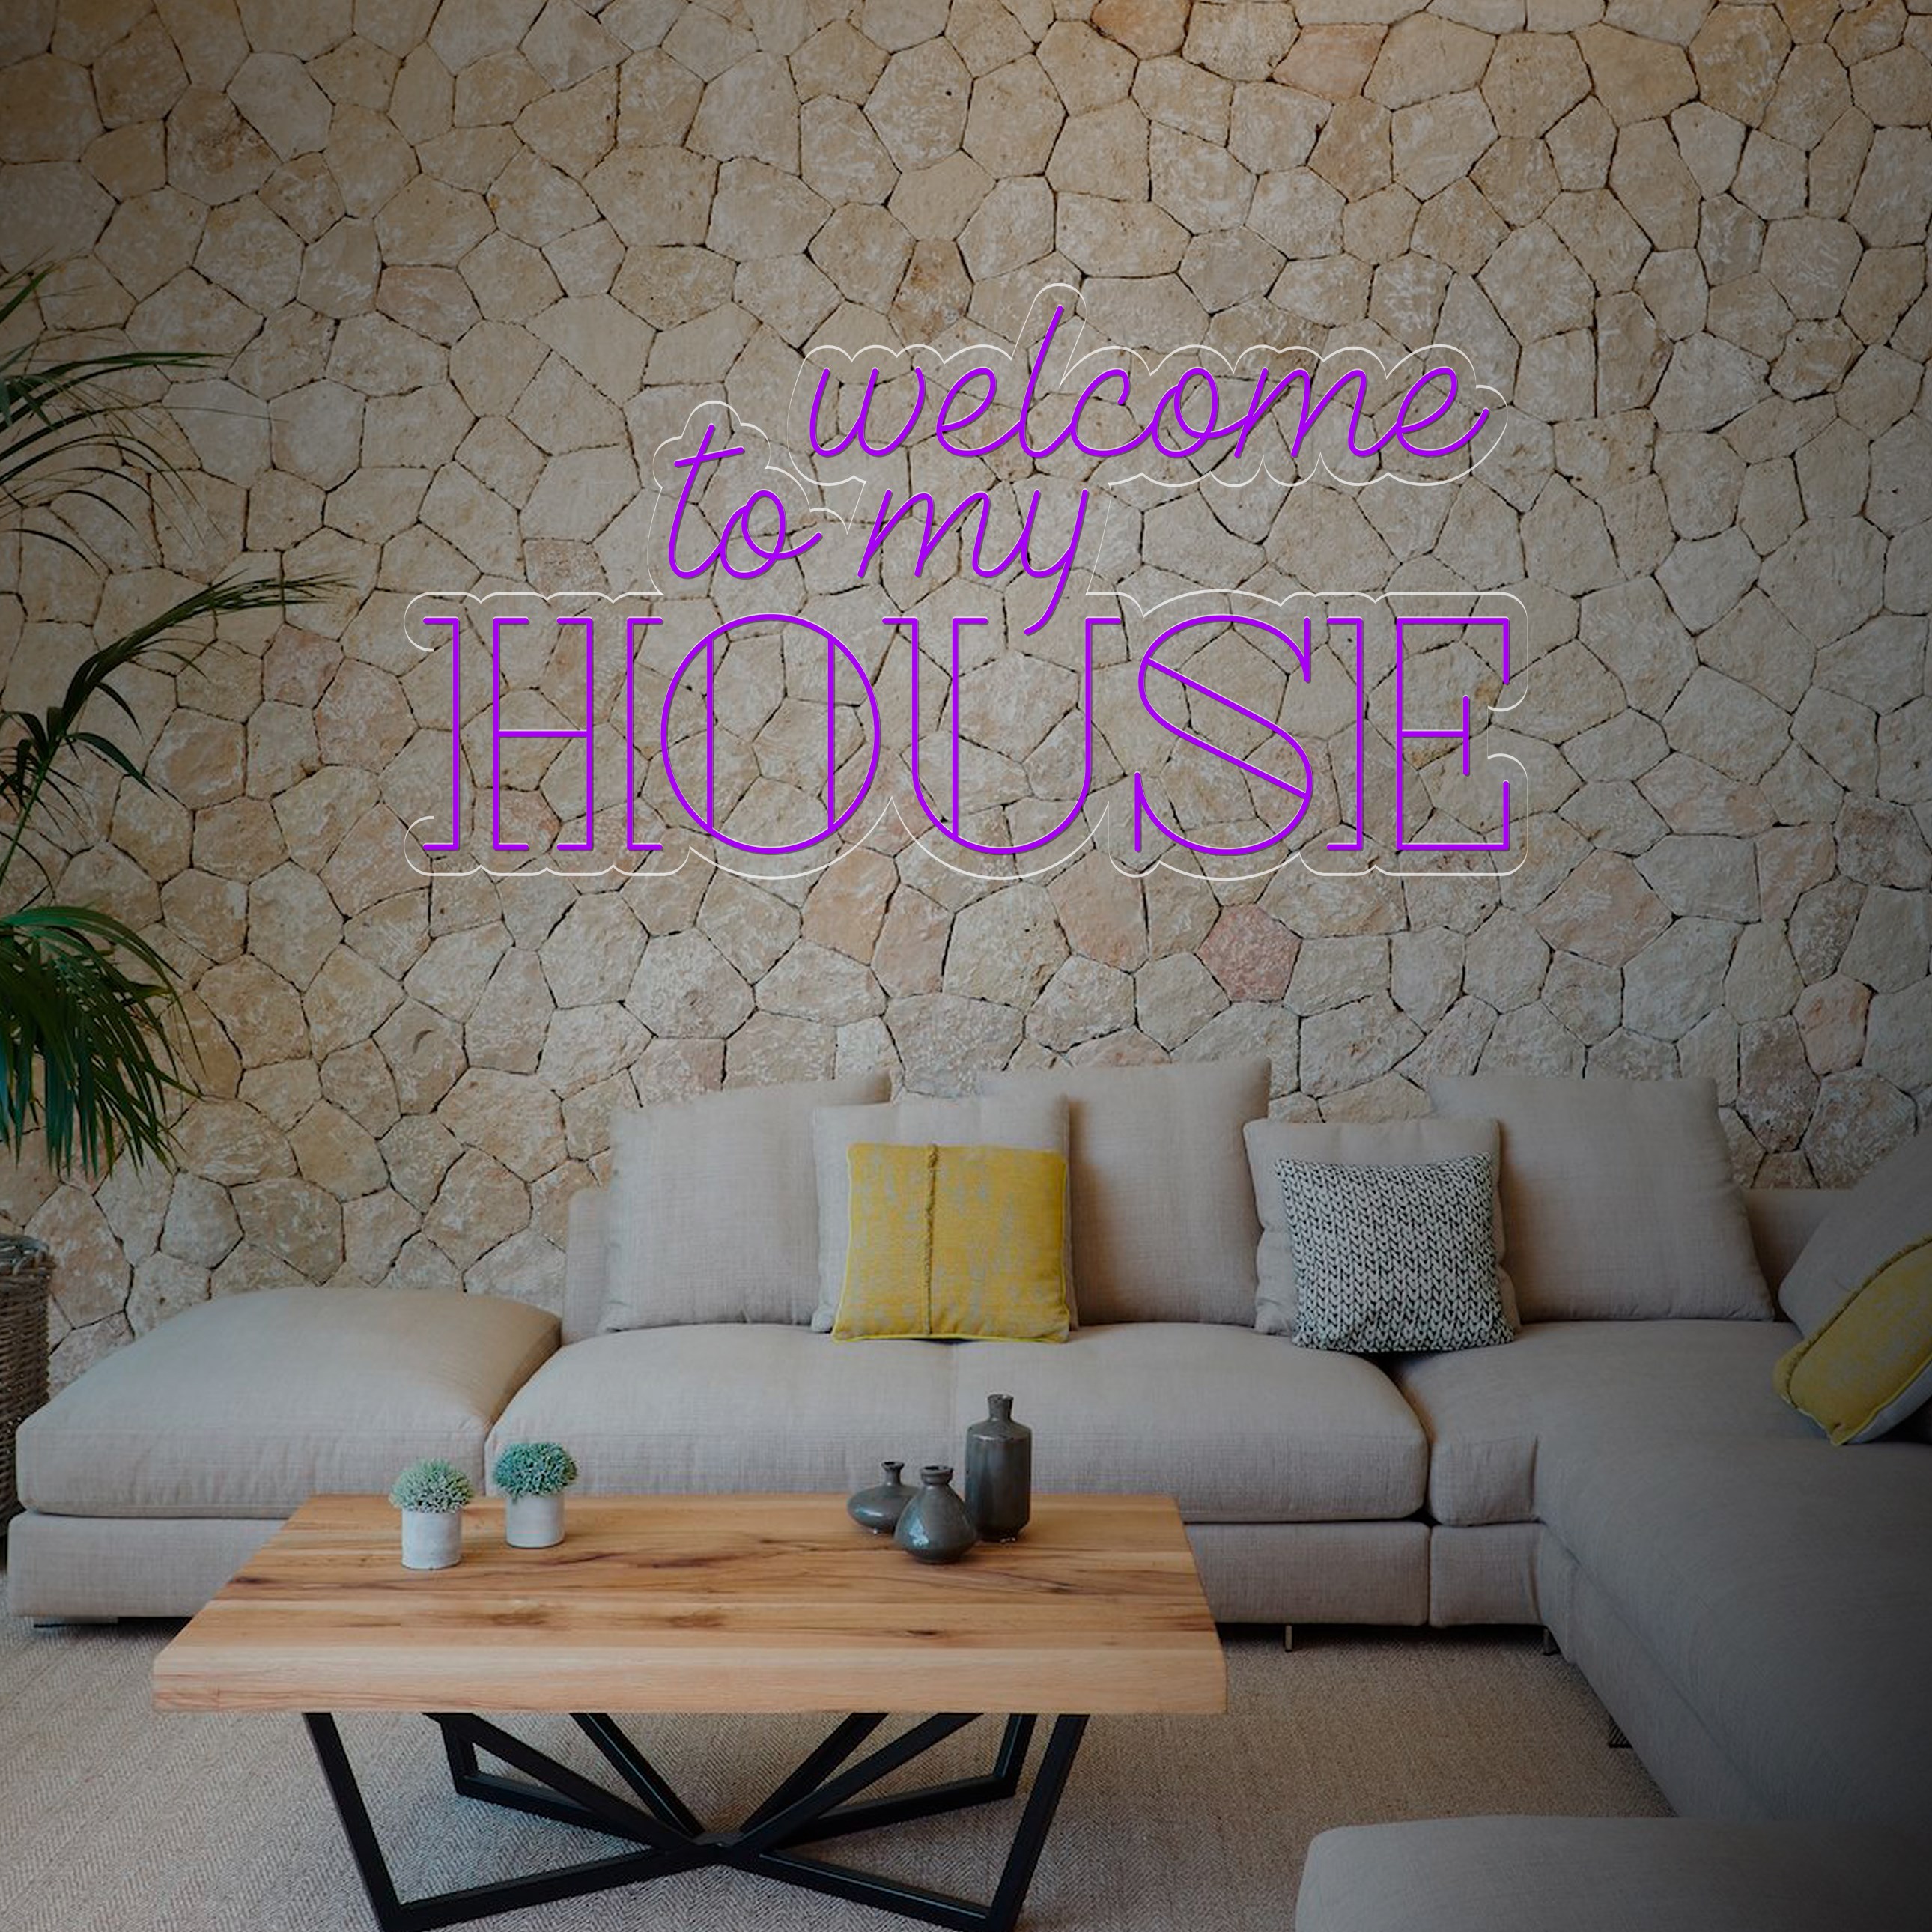 Immagine di Neon "Welcome To My House"